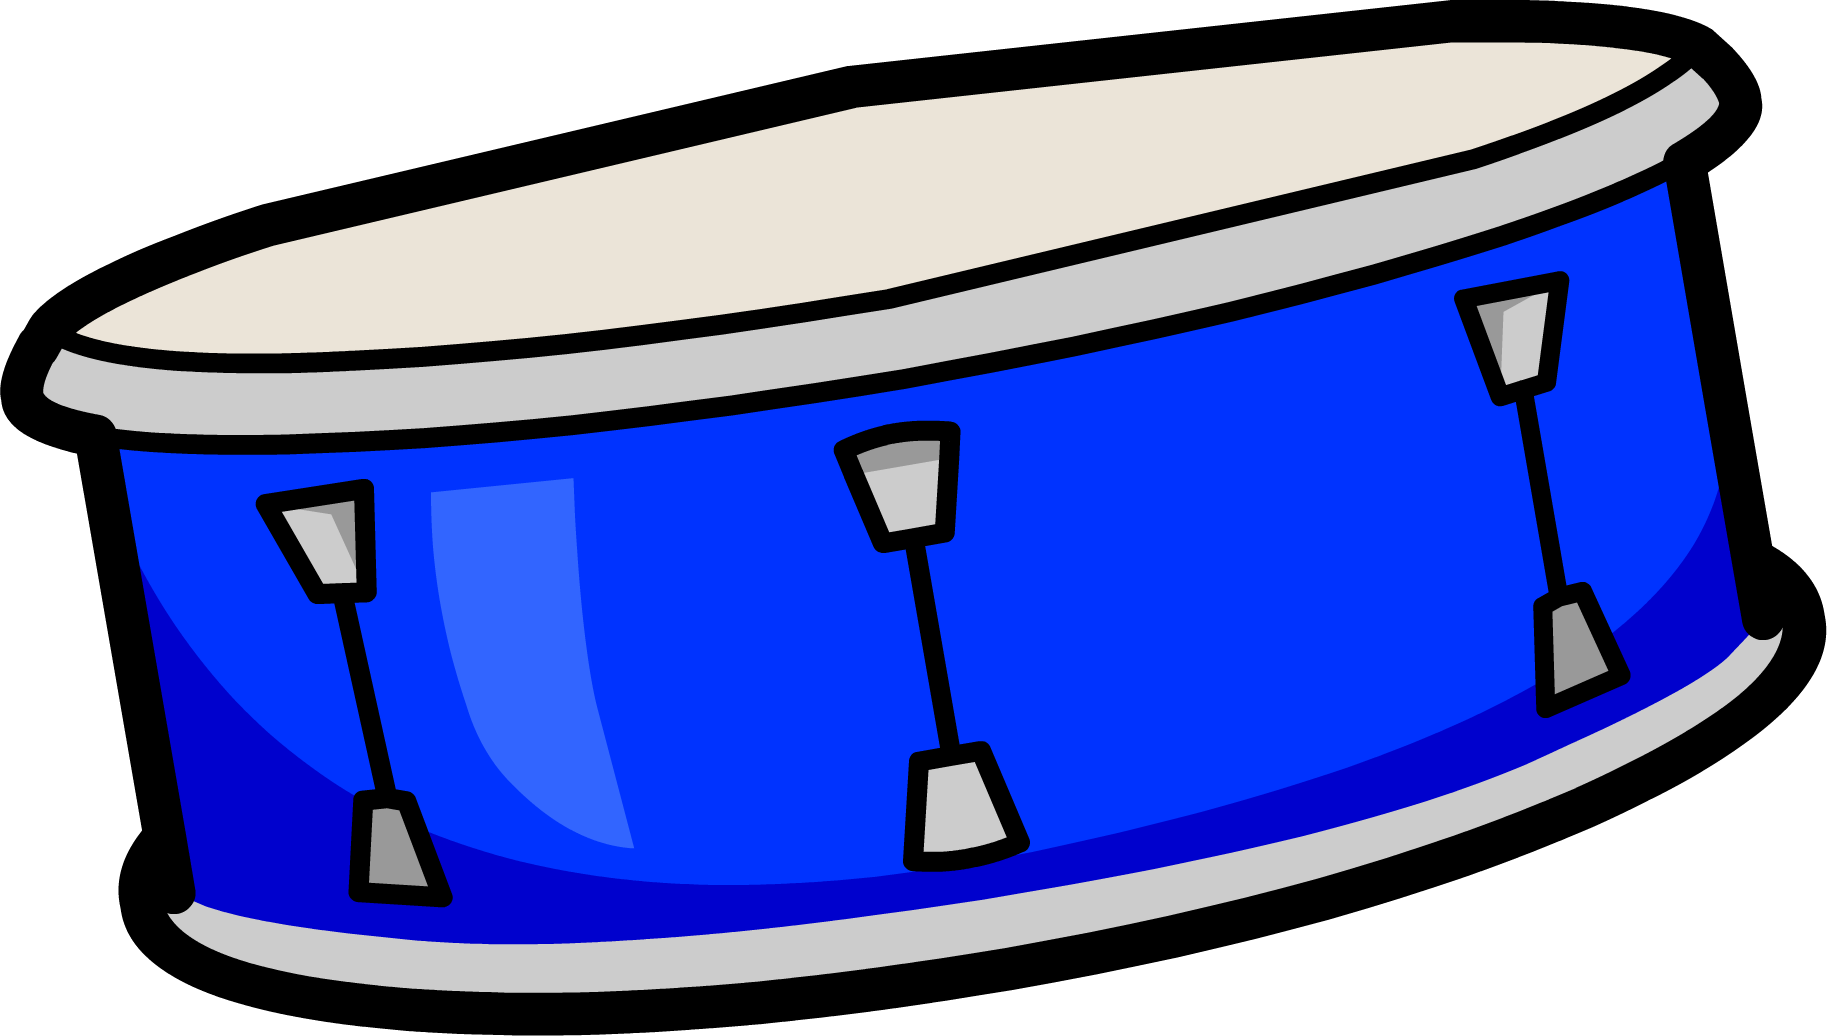 Blue Snare Drum Cartoon PNG image